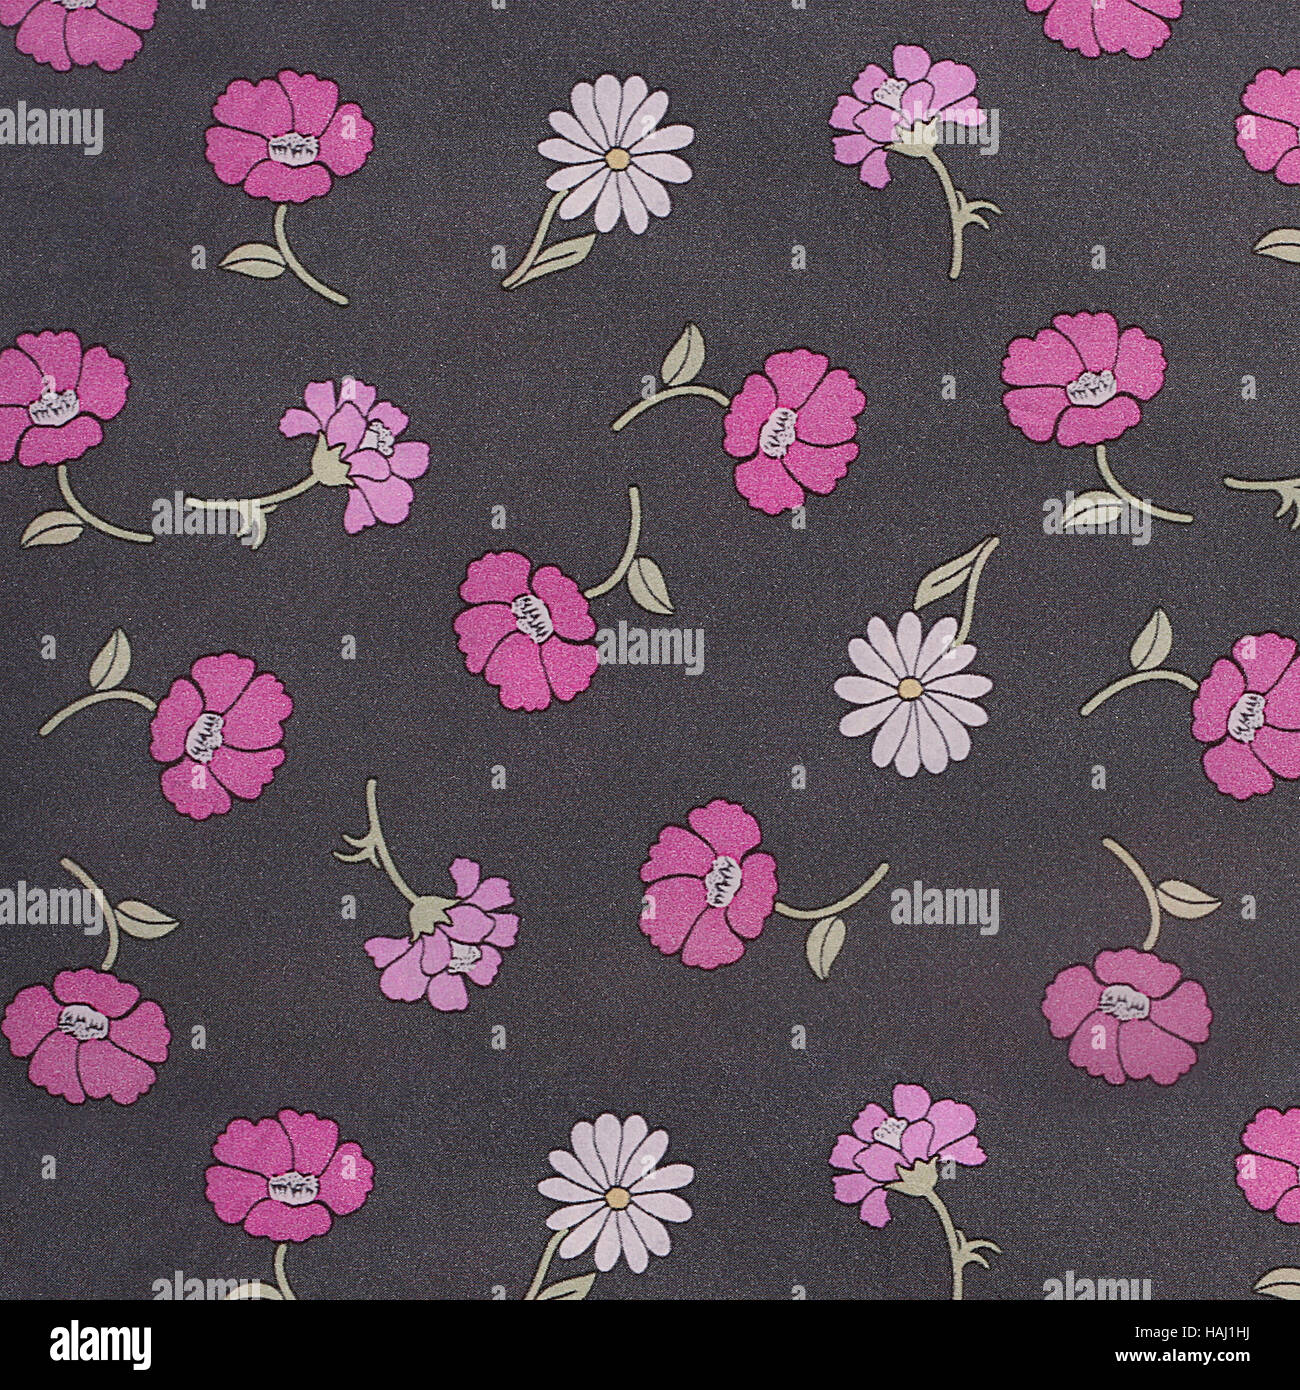 floral background Stock Photo